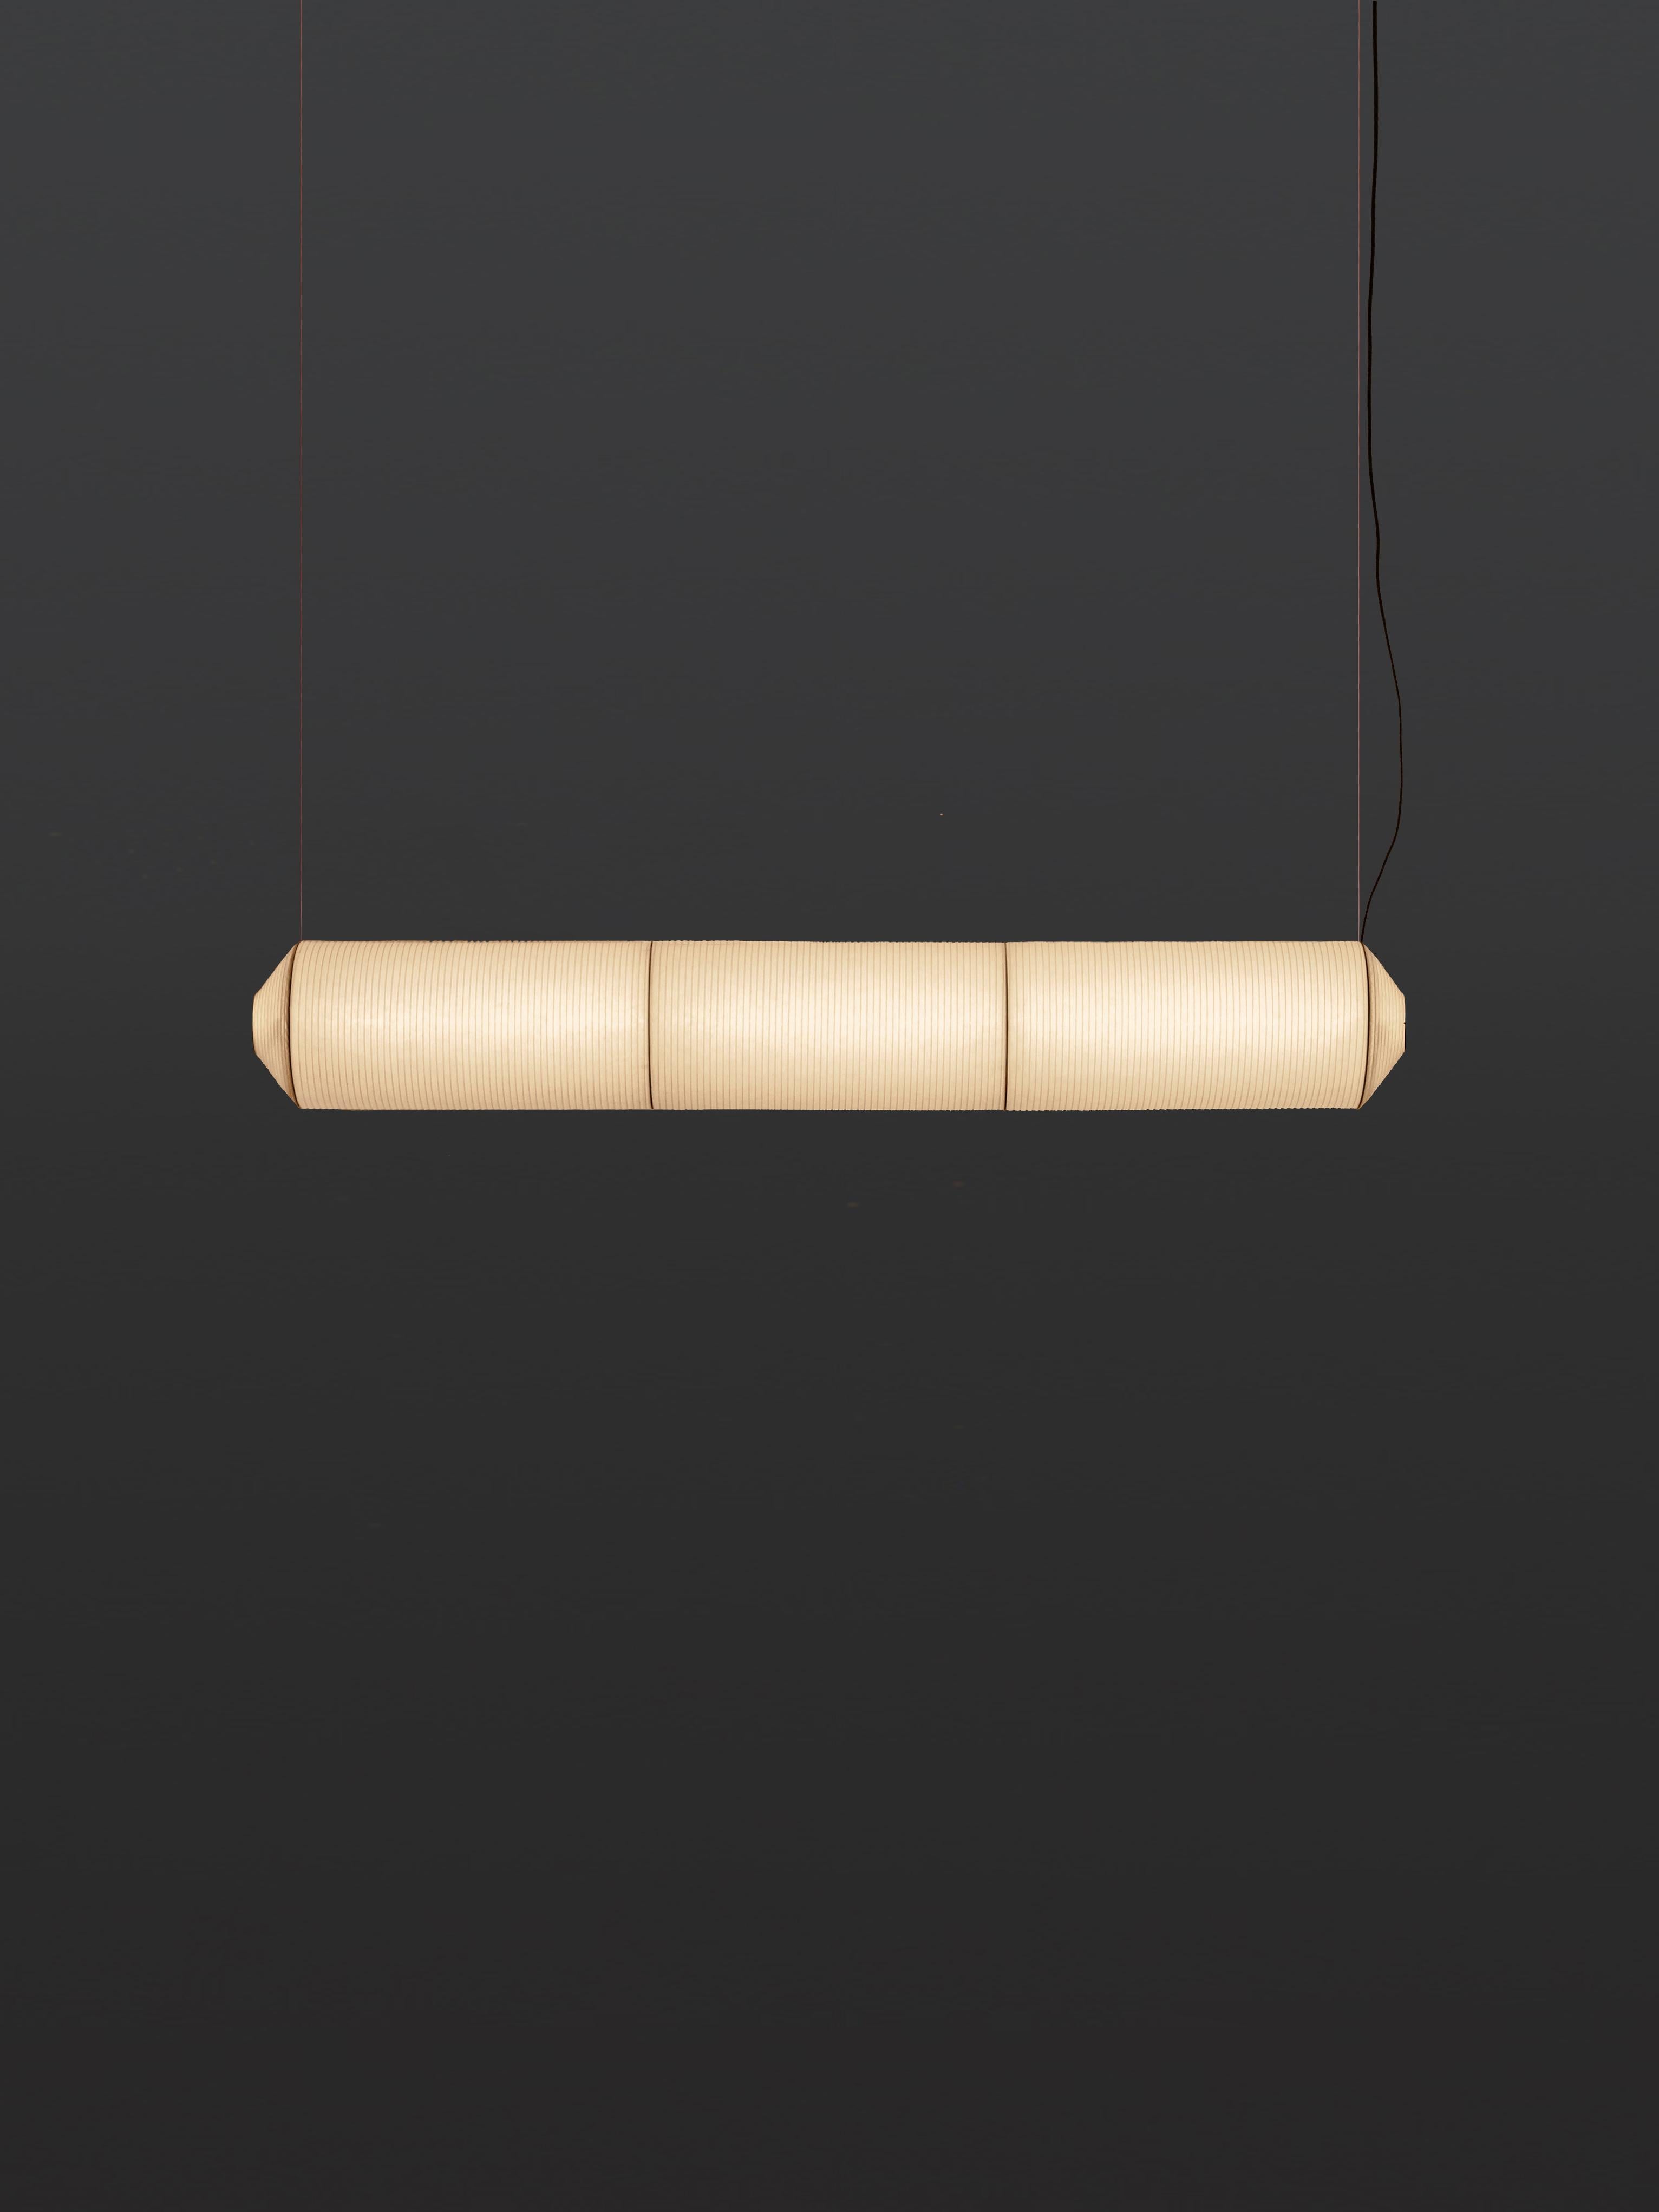 Tekiò Horizontal P3 pendant lamp by Anthony Dickens
Dimensions: D 25 x W 173 x H 25 cm
Materials: Metal, Washi japanese paper shade.
Available in circular or rectangular canopy.

Tekiò, the Japanese word for adaptation, merges ancient artisan